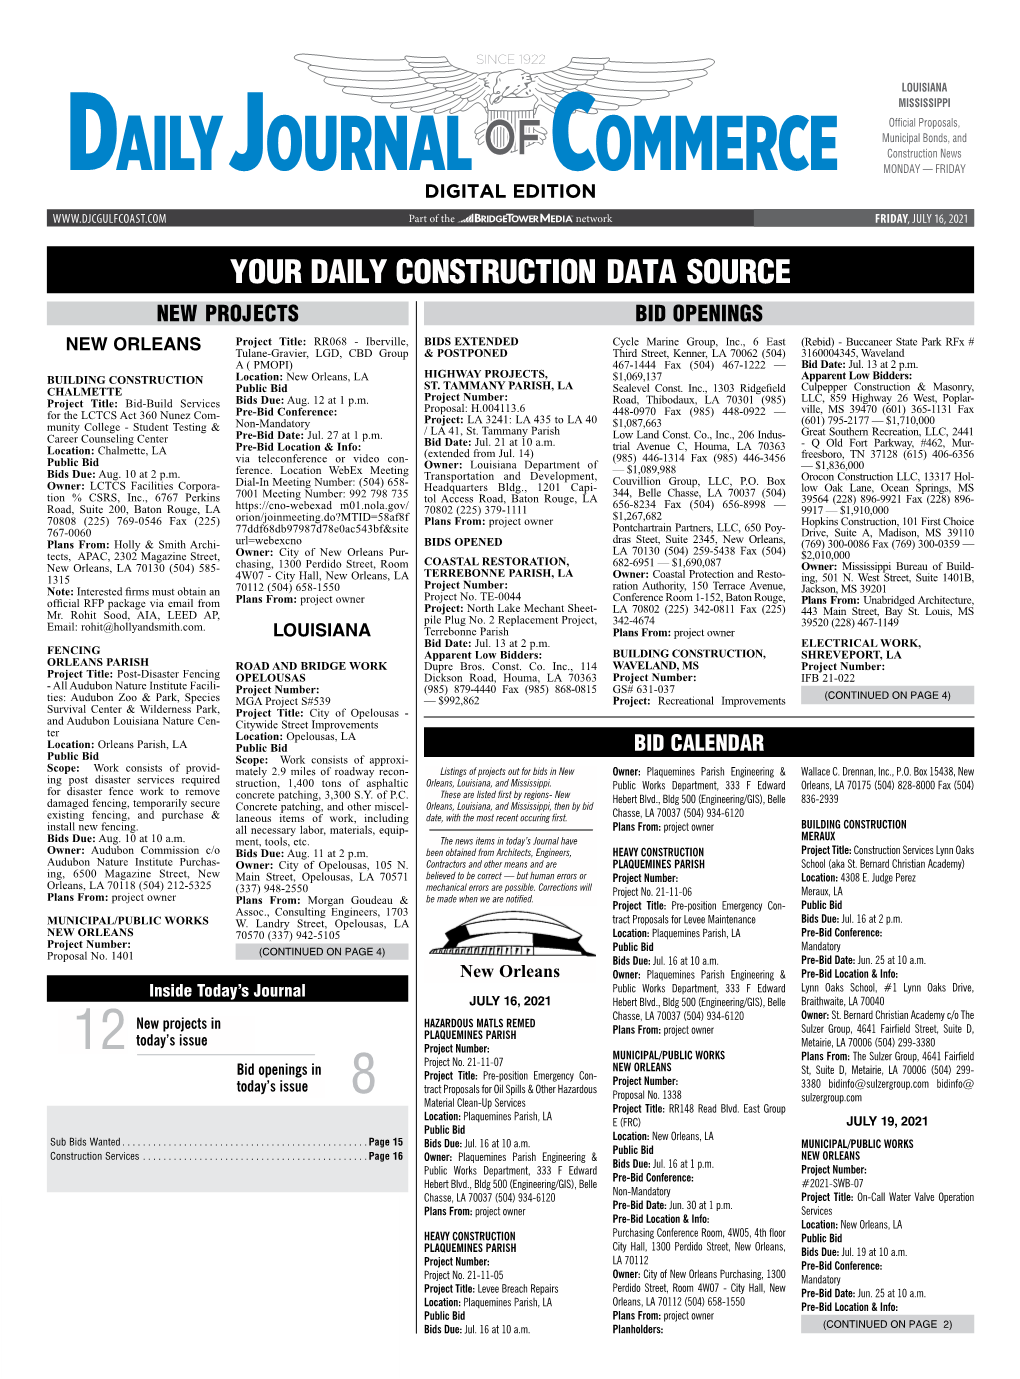 Your Daily Construction Data Source